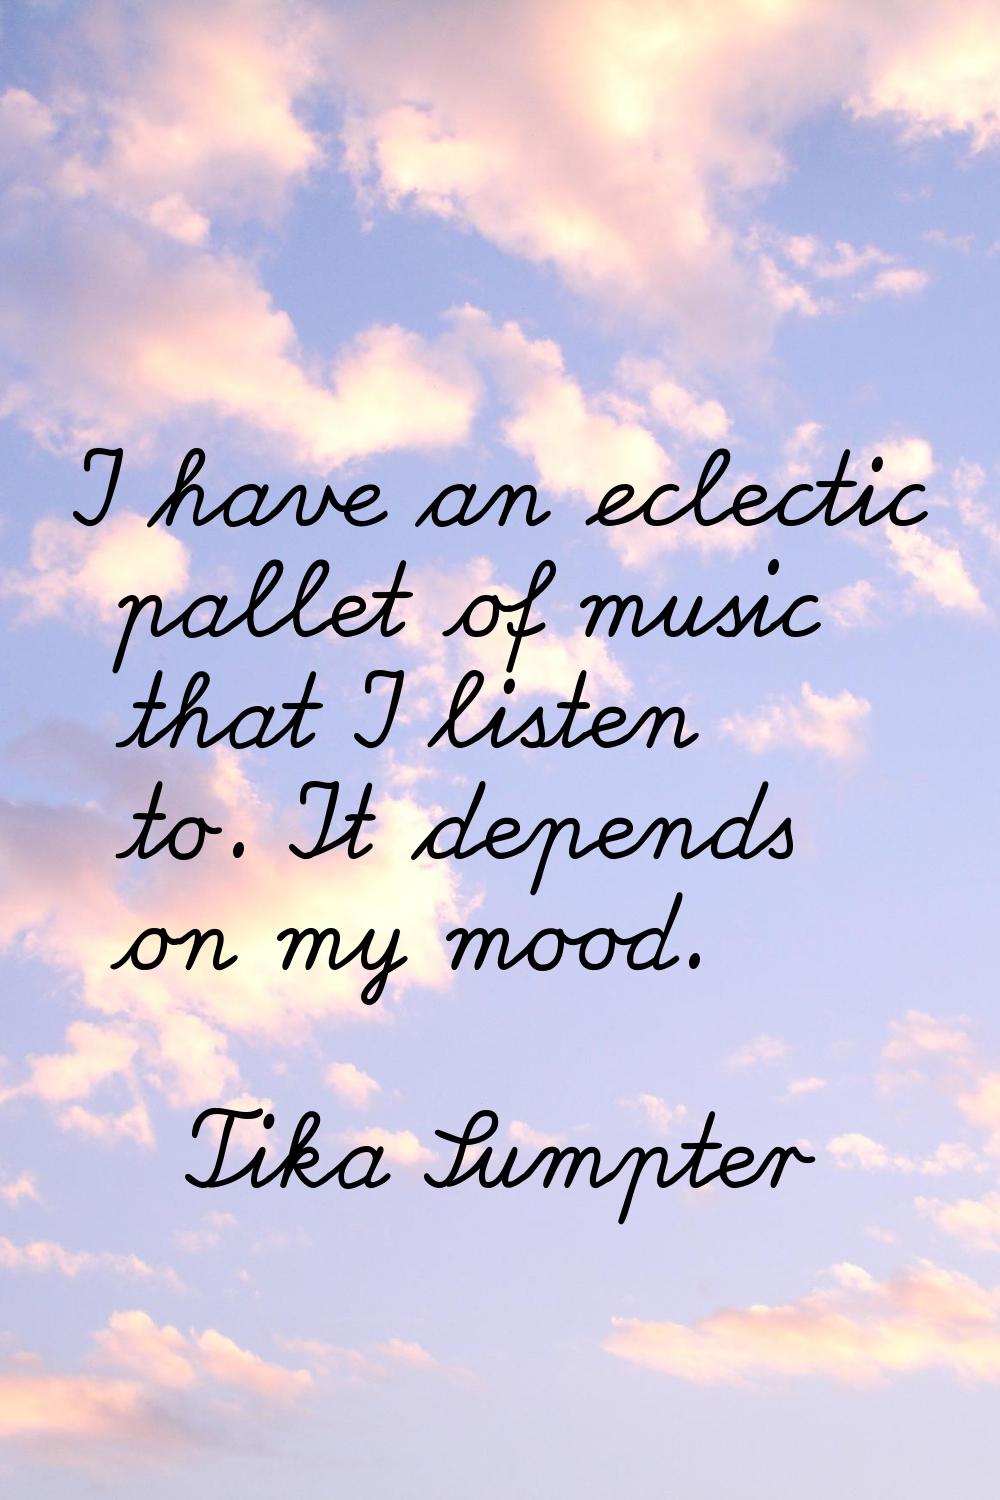 I have an eclectic pallet of music that I listen to. It depends on my mood.